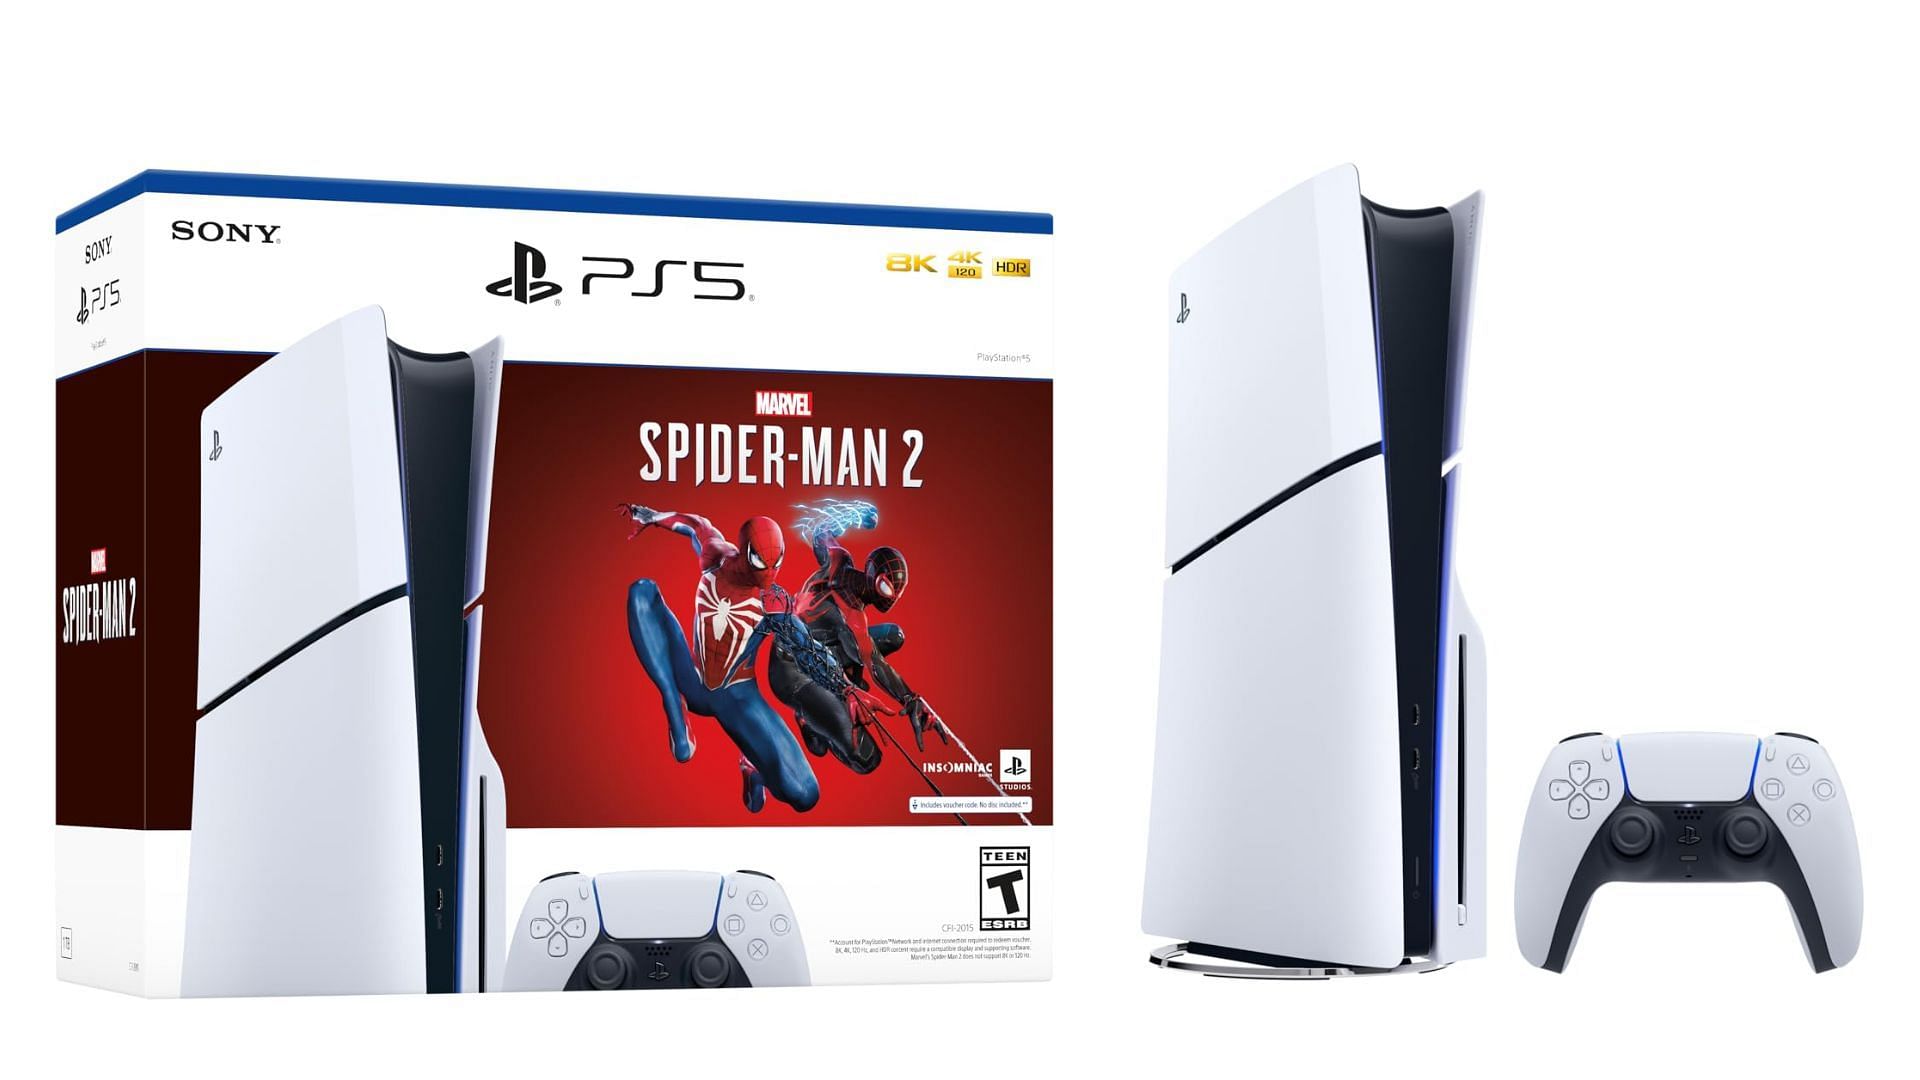 The PS5 slim with Spider-Man 2 has been discounted this Black Friday (Image via Sony)